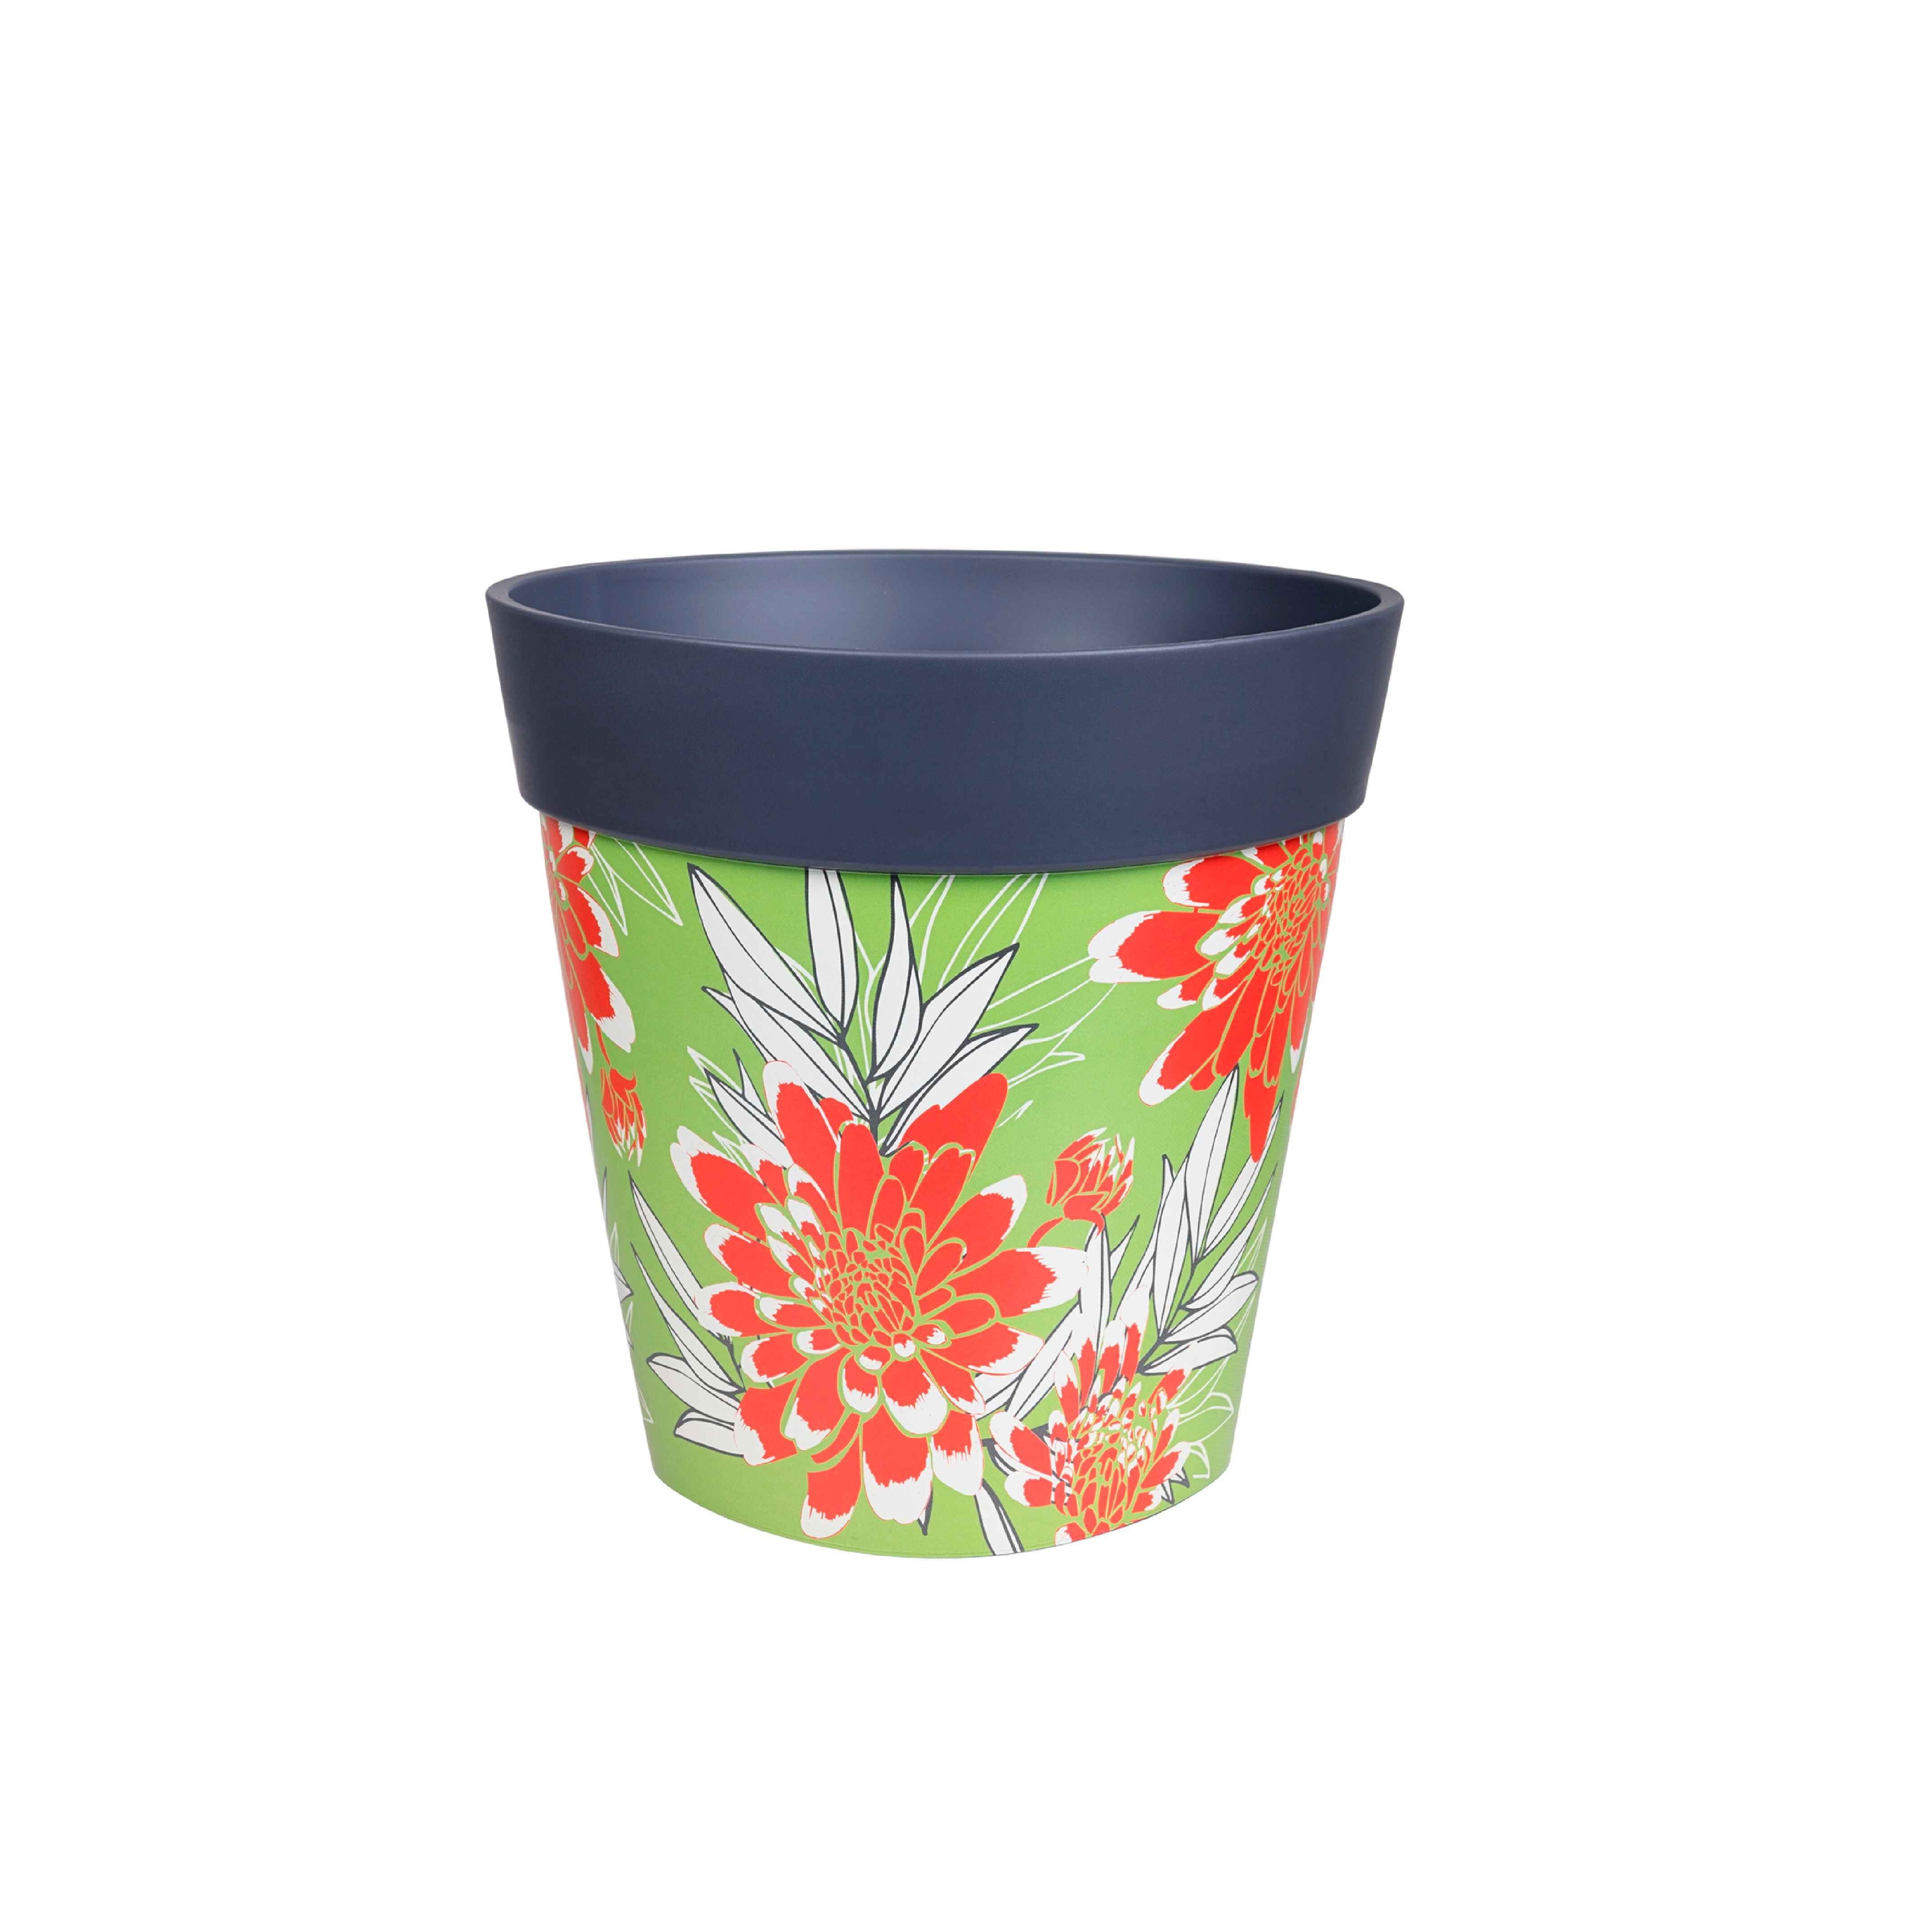 Picture of Medium 22cm Green and Red Floral Pattern Plastic Indoor/Outdoor Flowerpot 